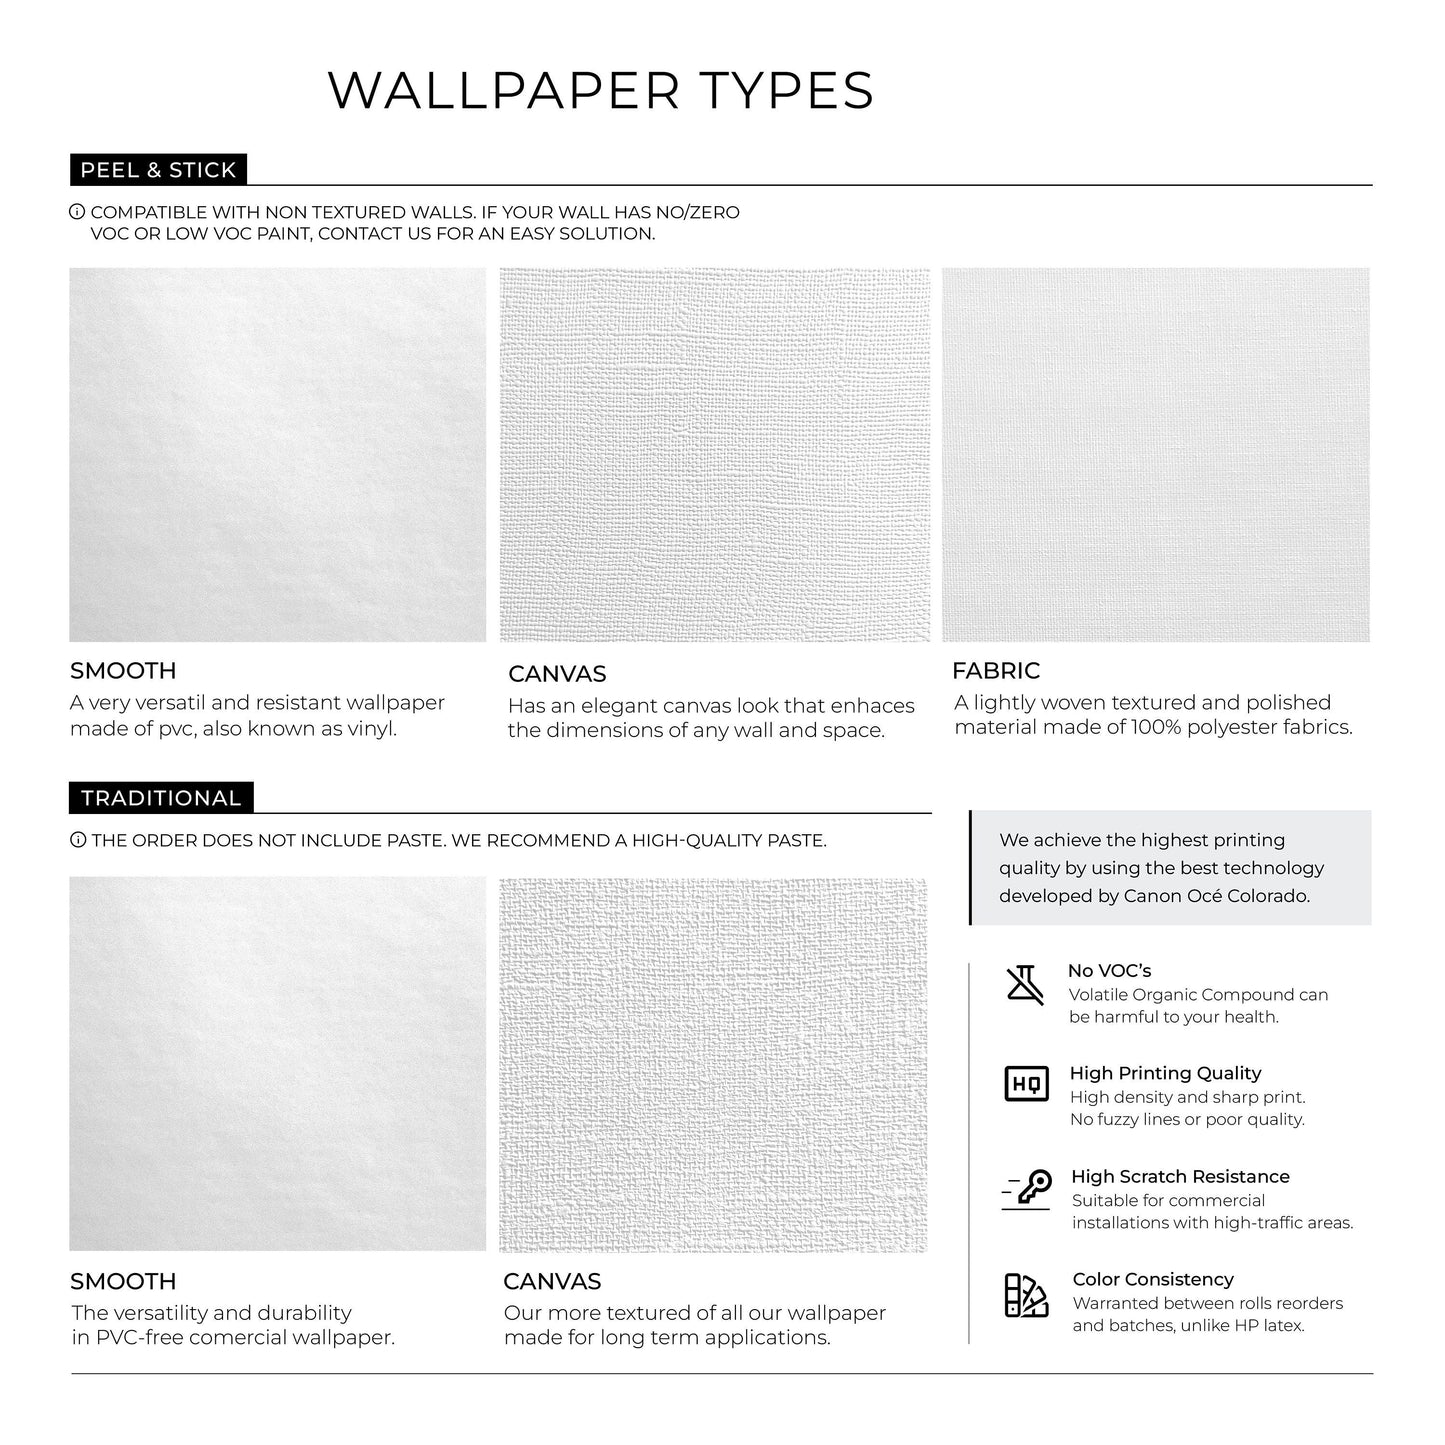 Removable Wallpaper, Temporary Wallpaper, Minimalistic Wallpaper, Peel and Stick Wallpaper, Wall Paper - A391